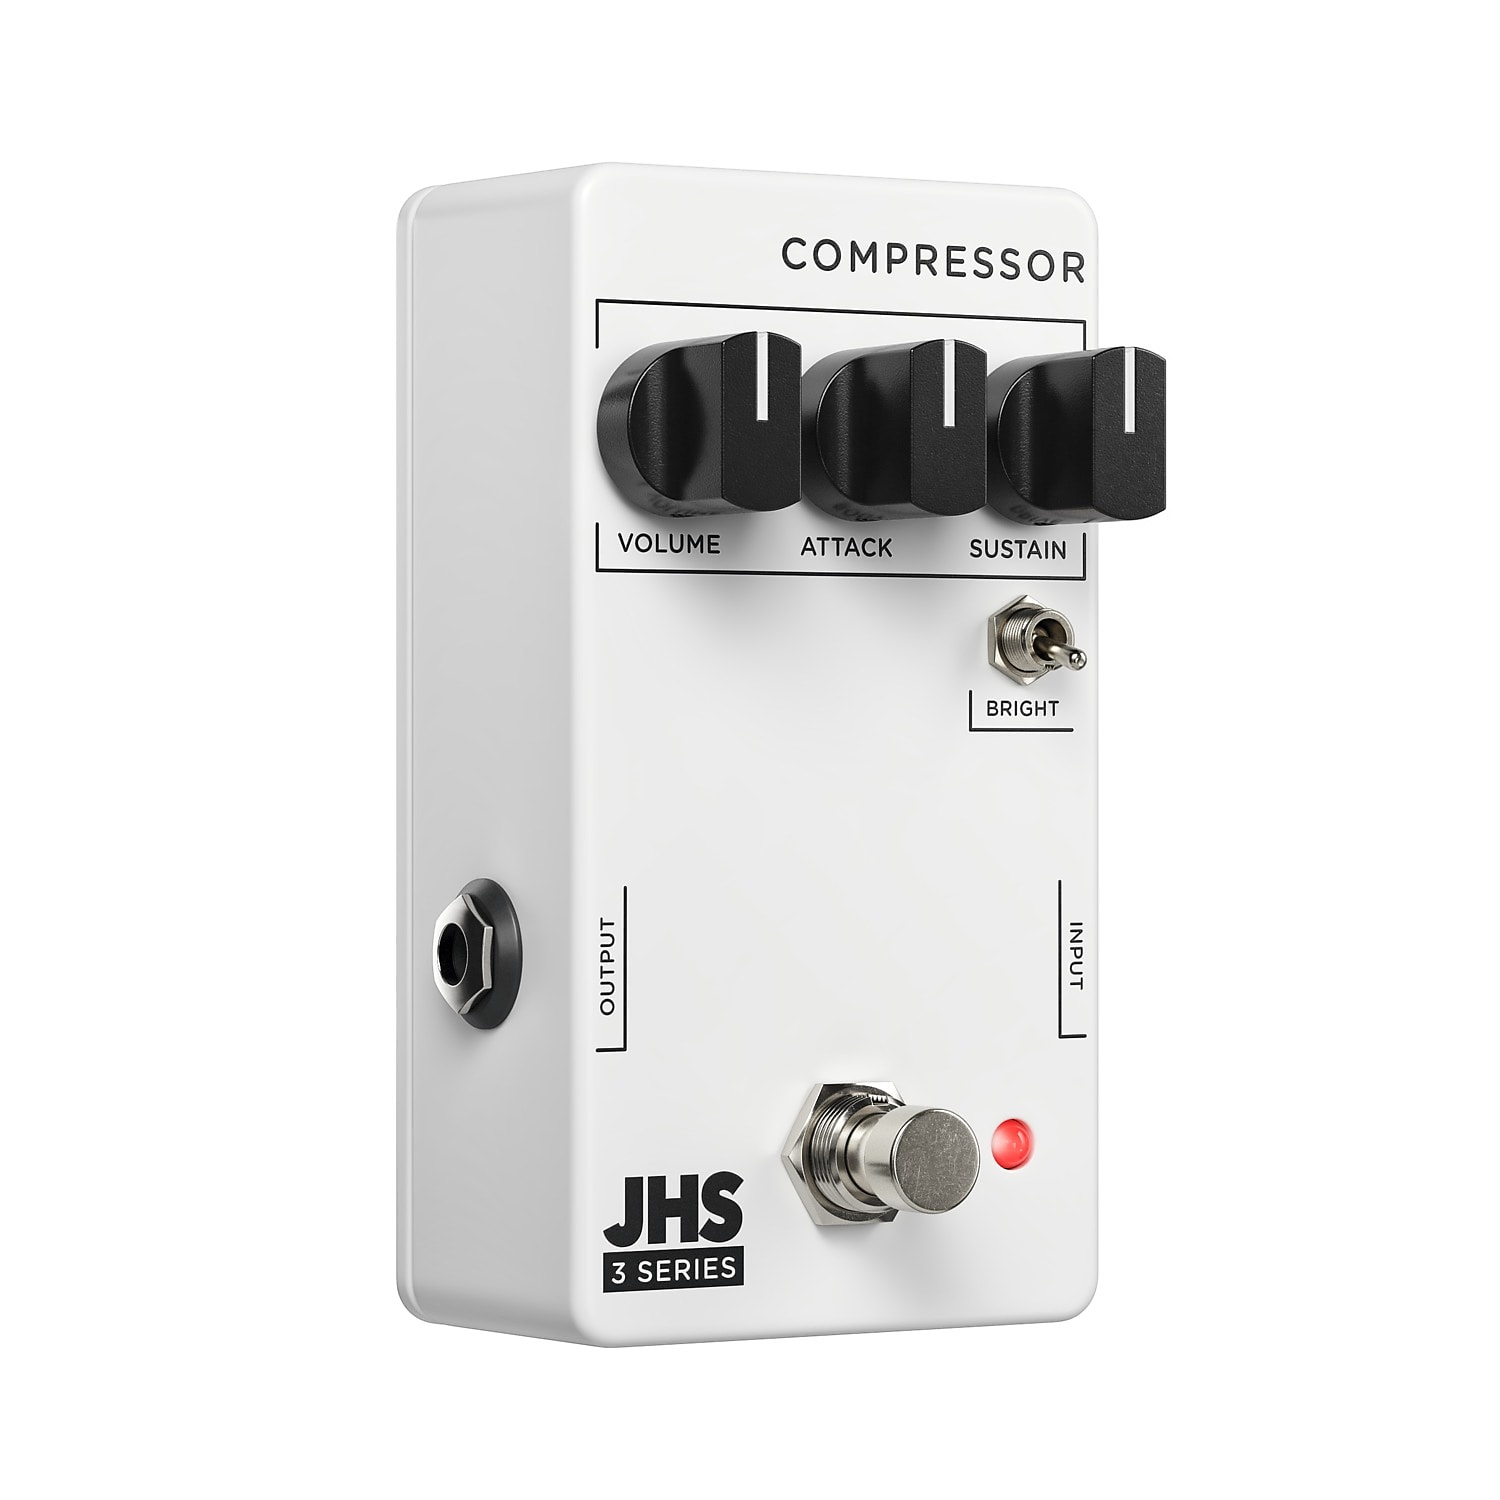 JHS 3 Series Compressor Effects Pedal